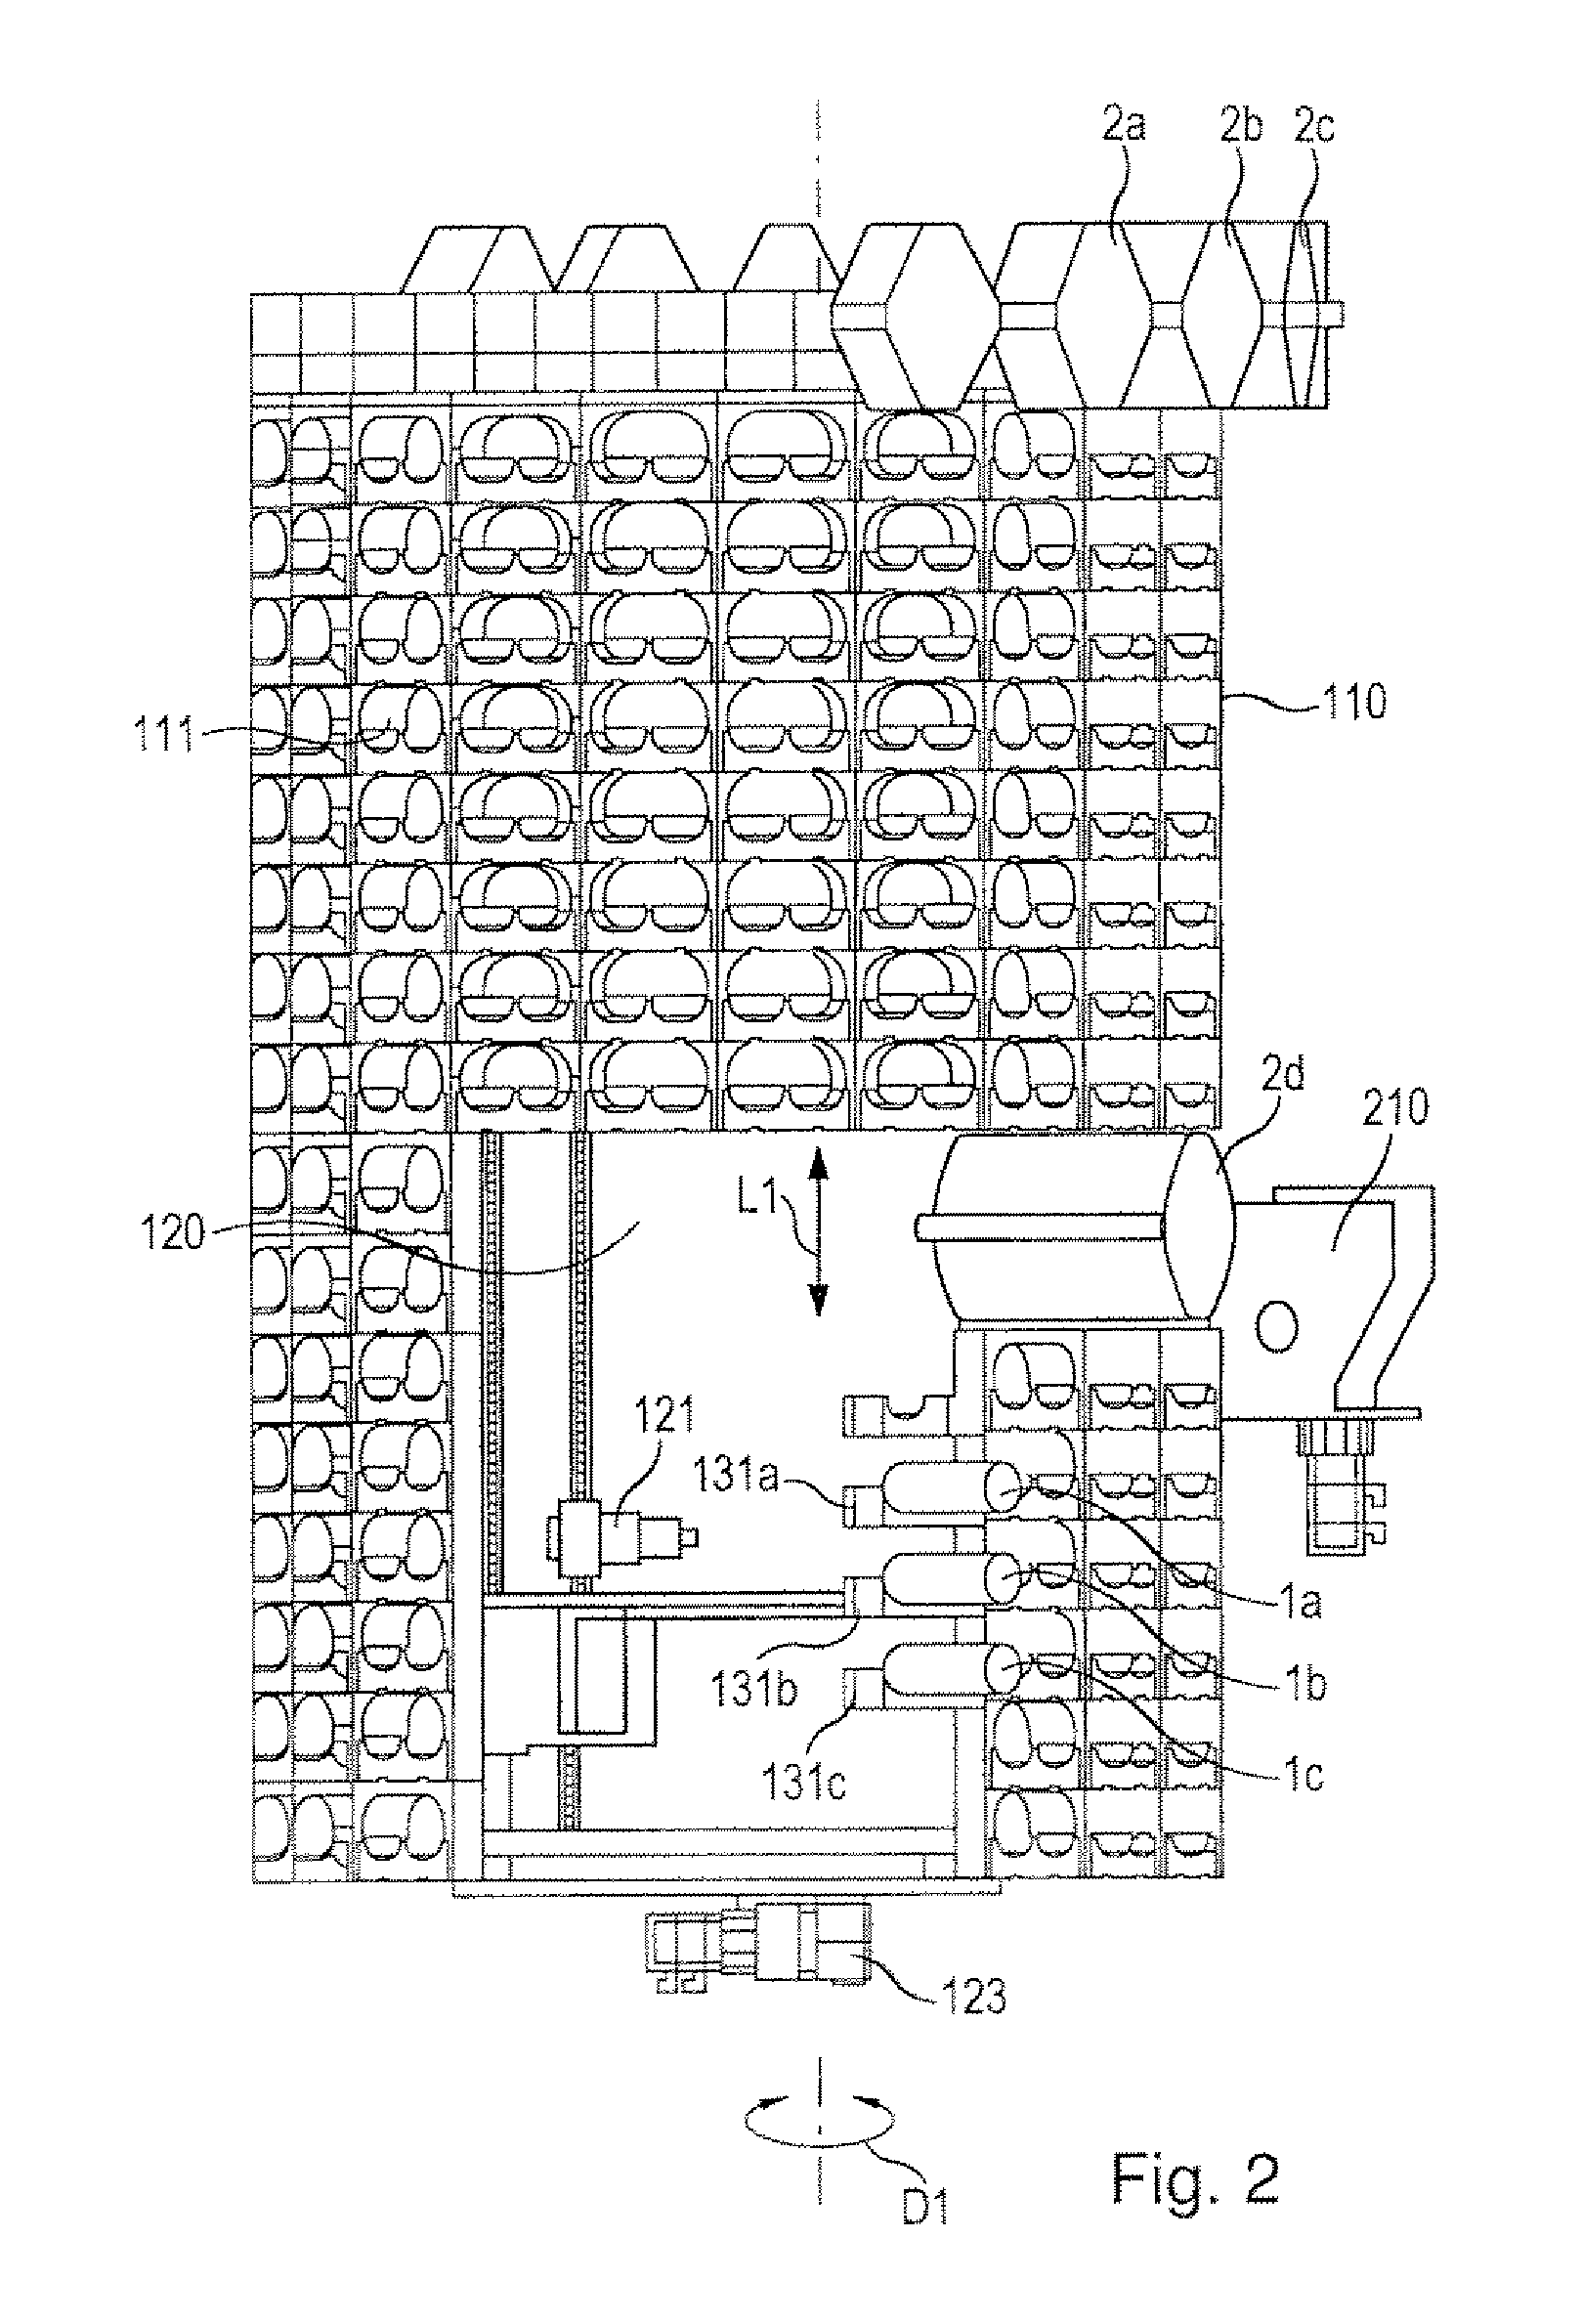 System for Changing and Inserting or Placing Tools on a Machine Tool and Tool Magazine for Storing Tools